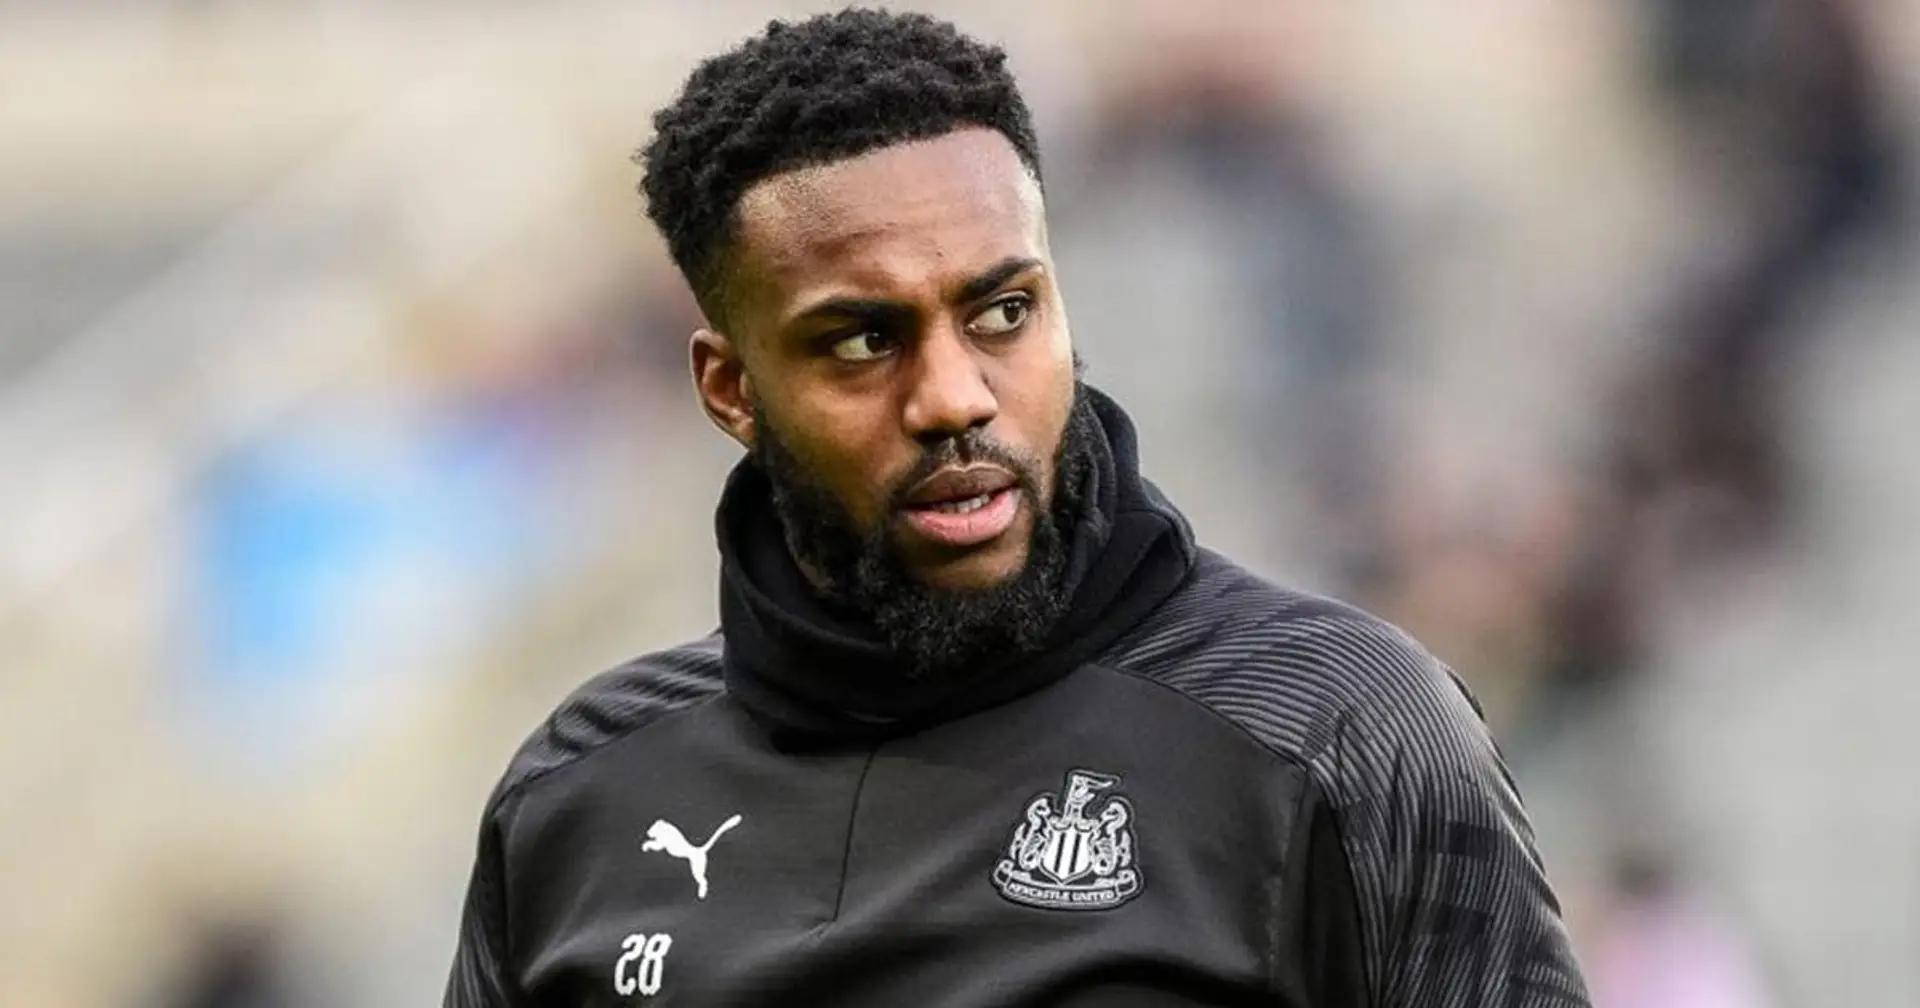 'I don't give a f*** about the nation's morale. People's lives are at risk!': Danny Rose slams Premier League return plans